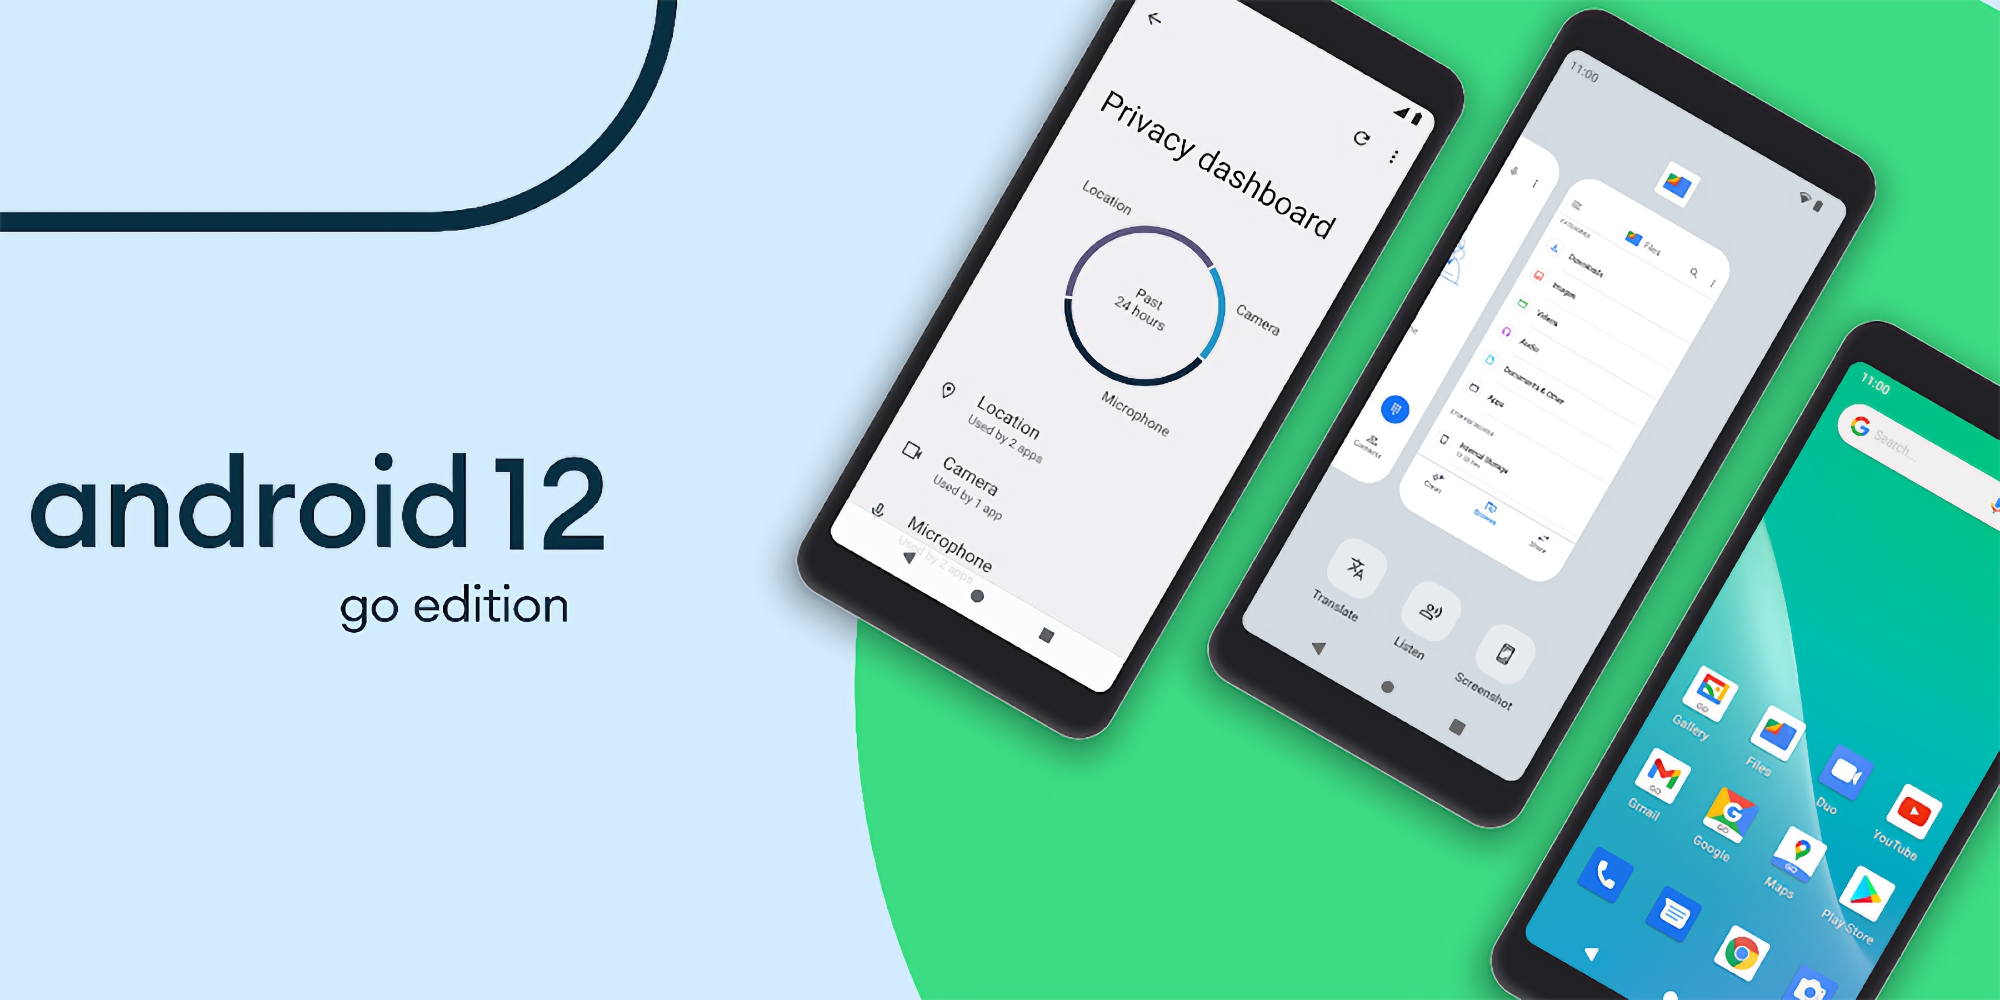 Google introduced Android 12 (Go Edition): a new simplified version of the Android OS